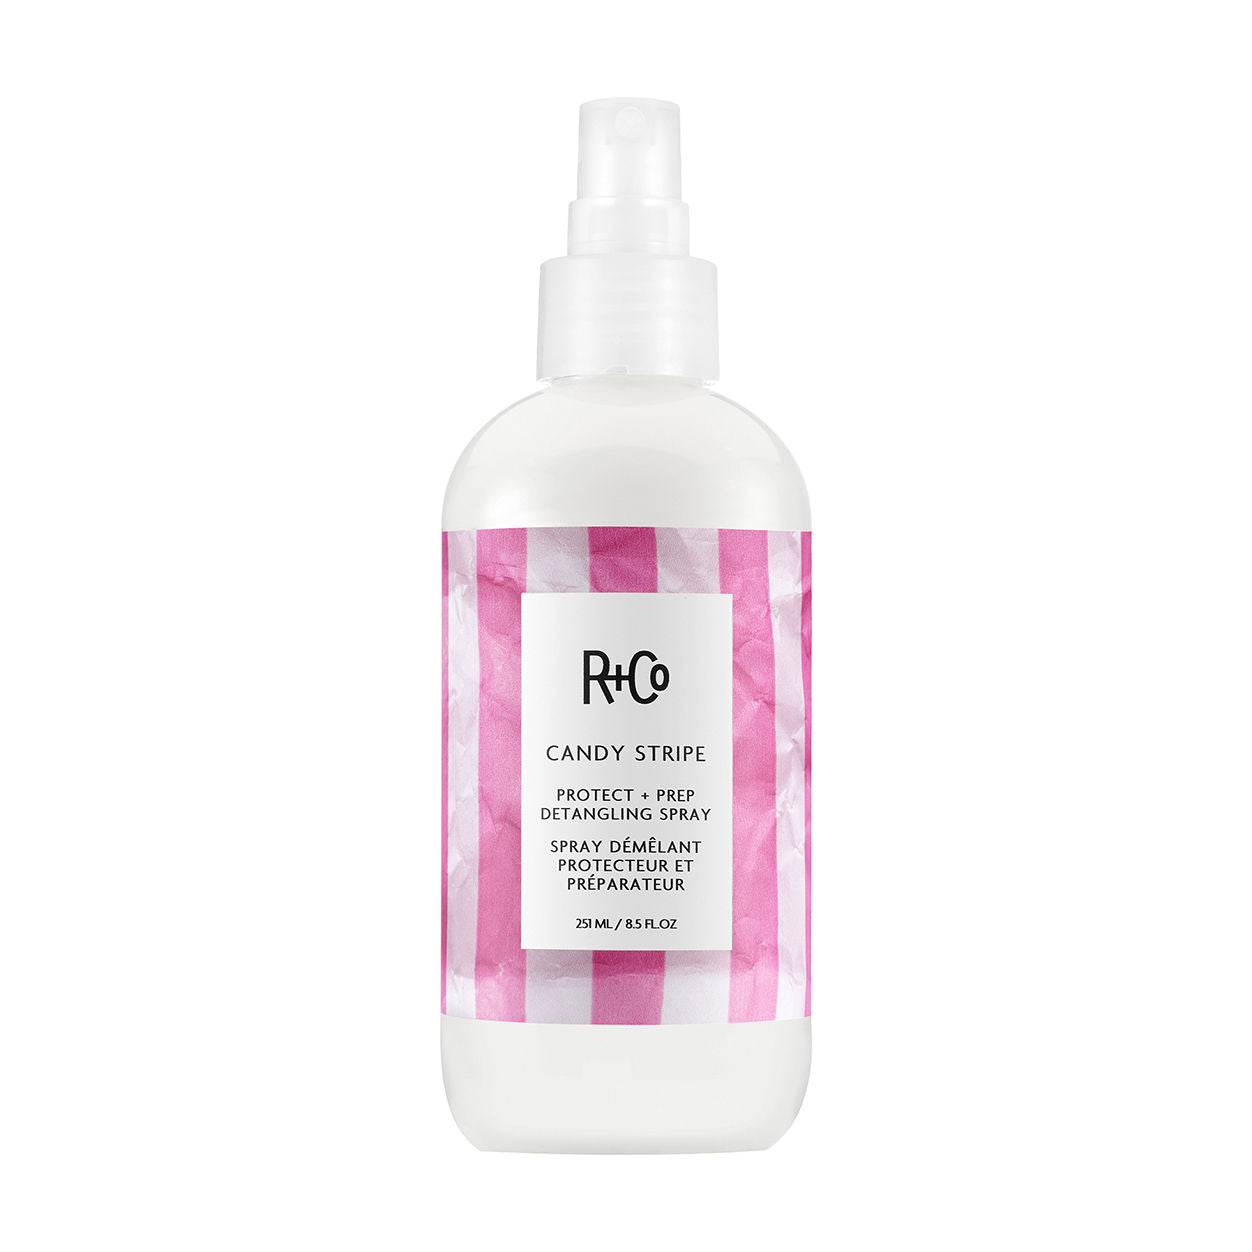 R+Co Candy Stripe Protect and Prep Detangling Spray main image